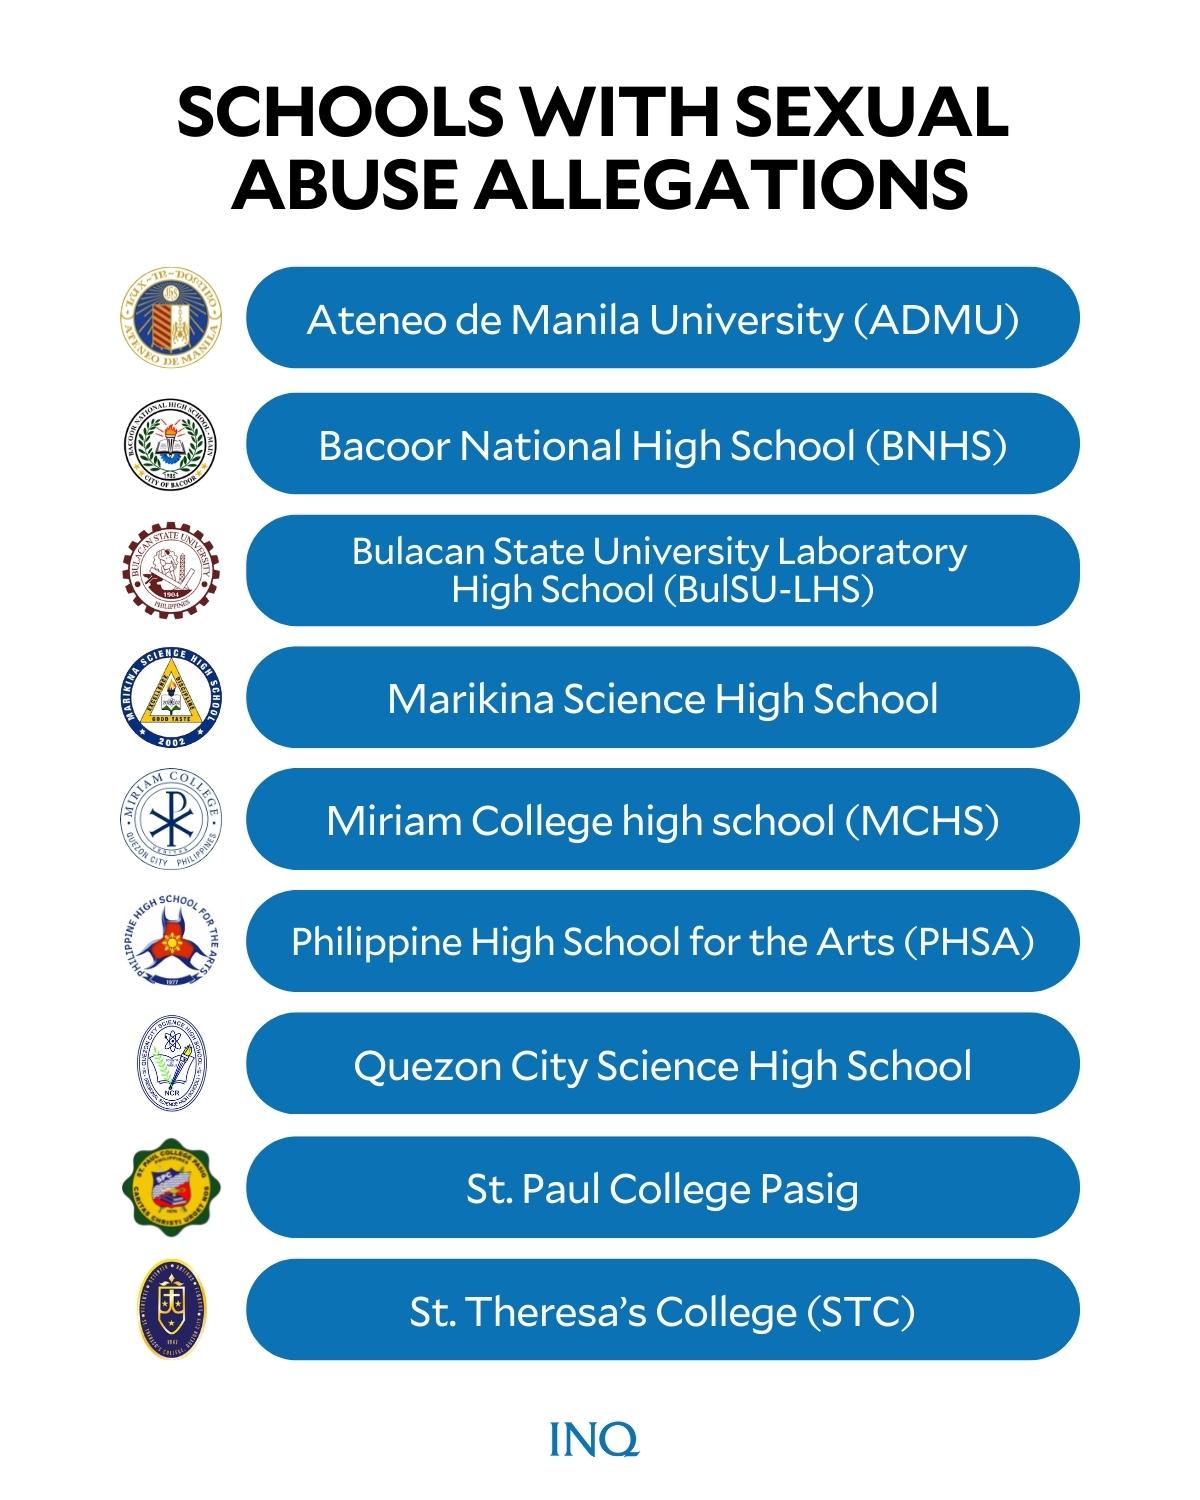  Schools with sexual abuse allegations